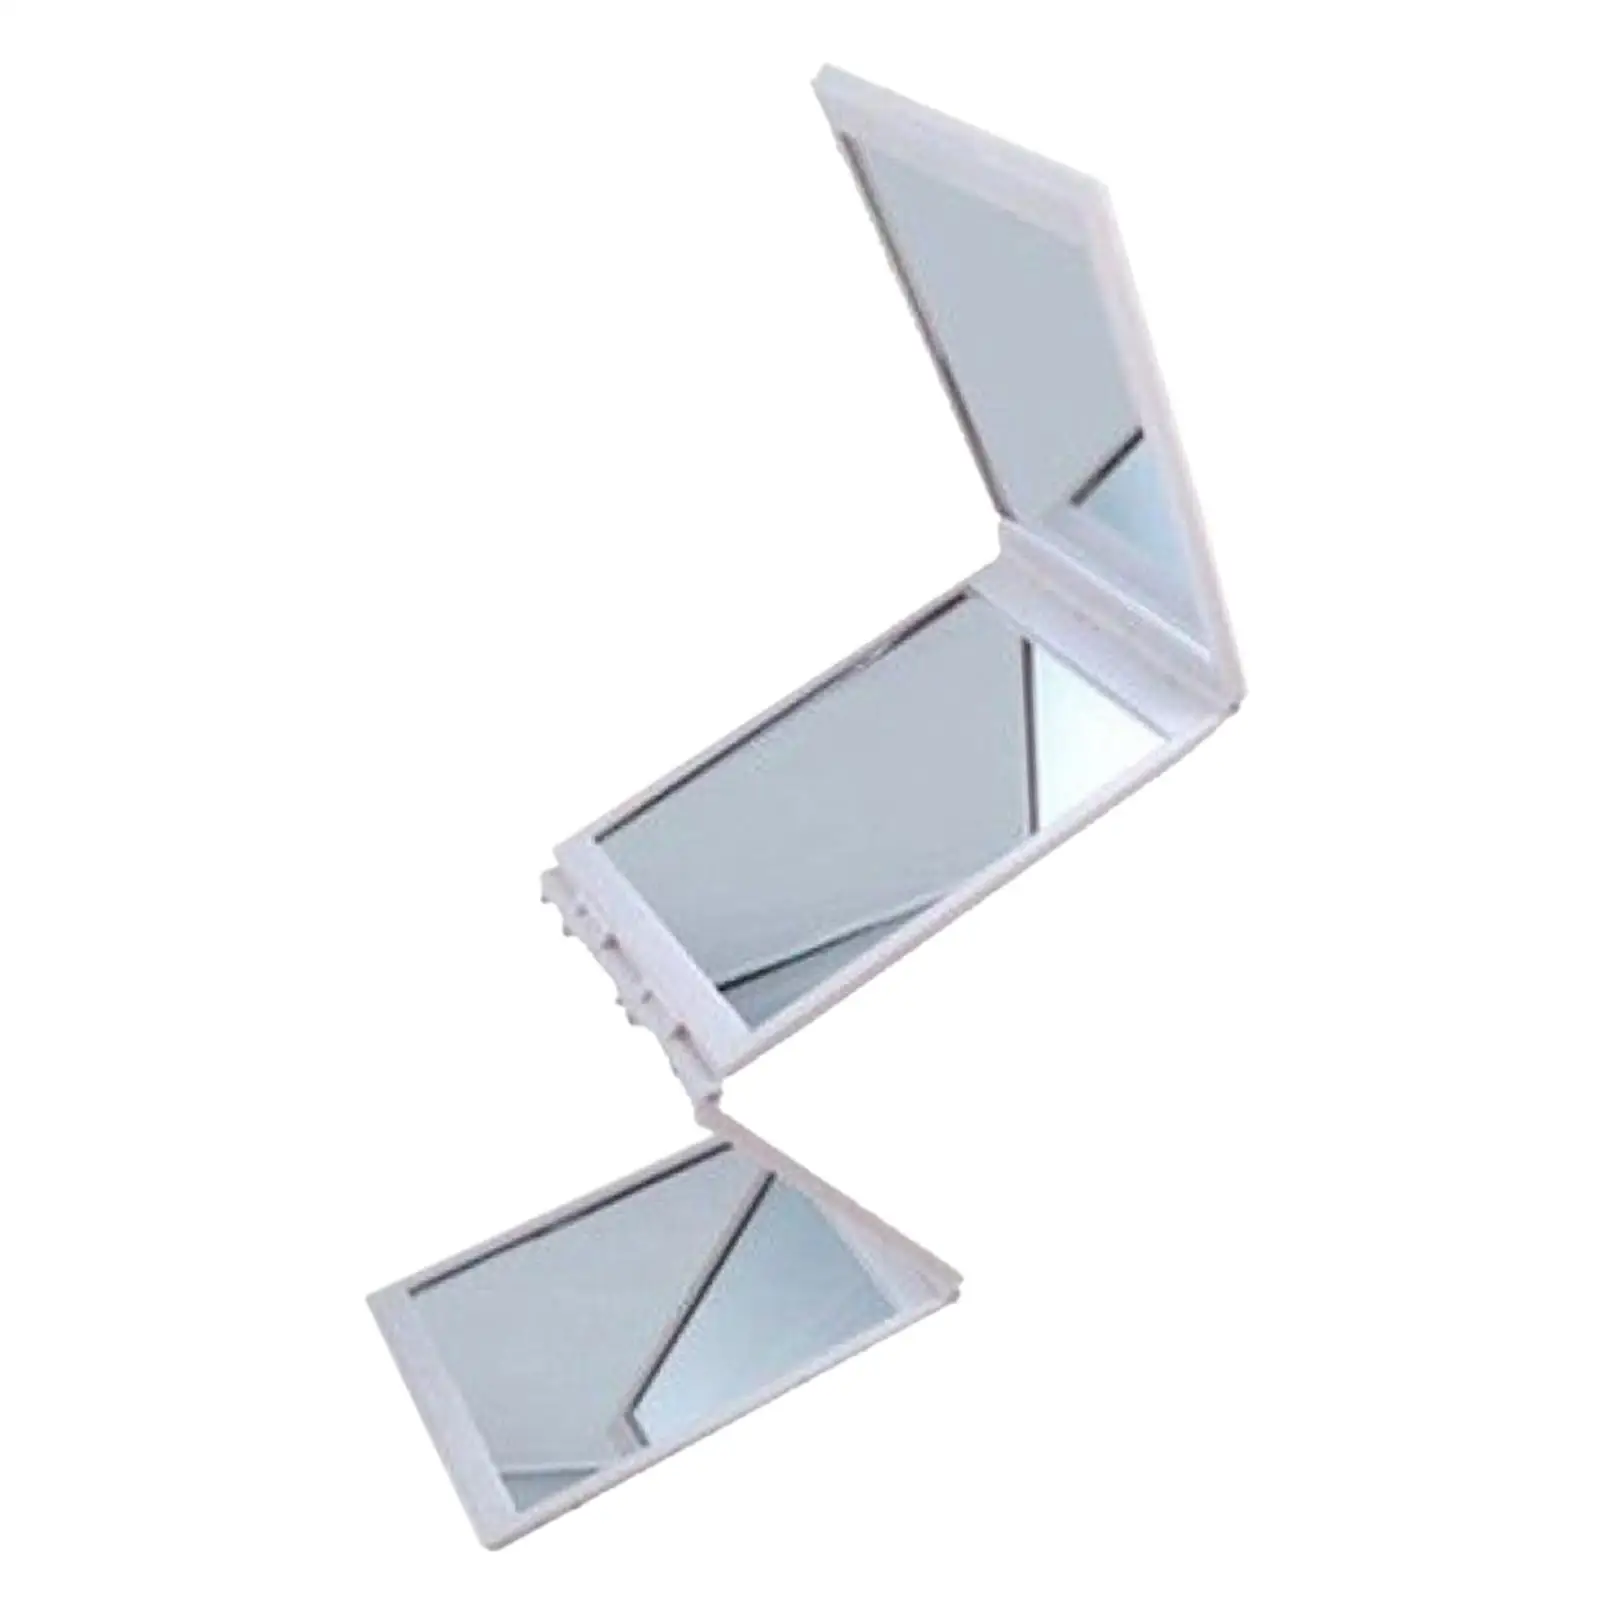 4 Sided Foldable Makeup Mirror Small Girl Compact Mirror Clear Travel Cosmetic Vanity Mirror for Bathroom Home Countertop SPA